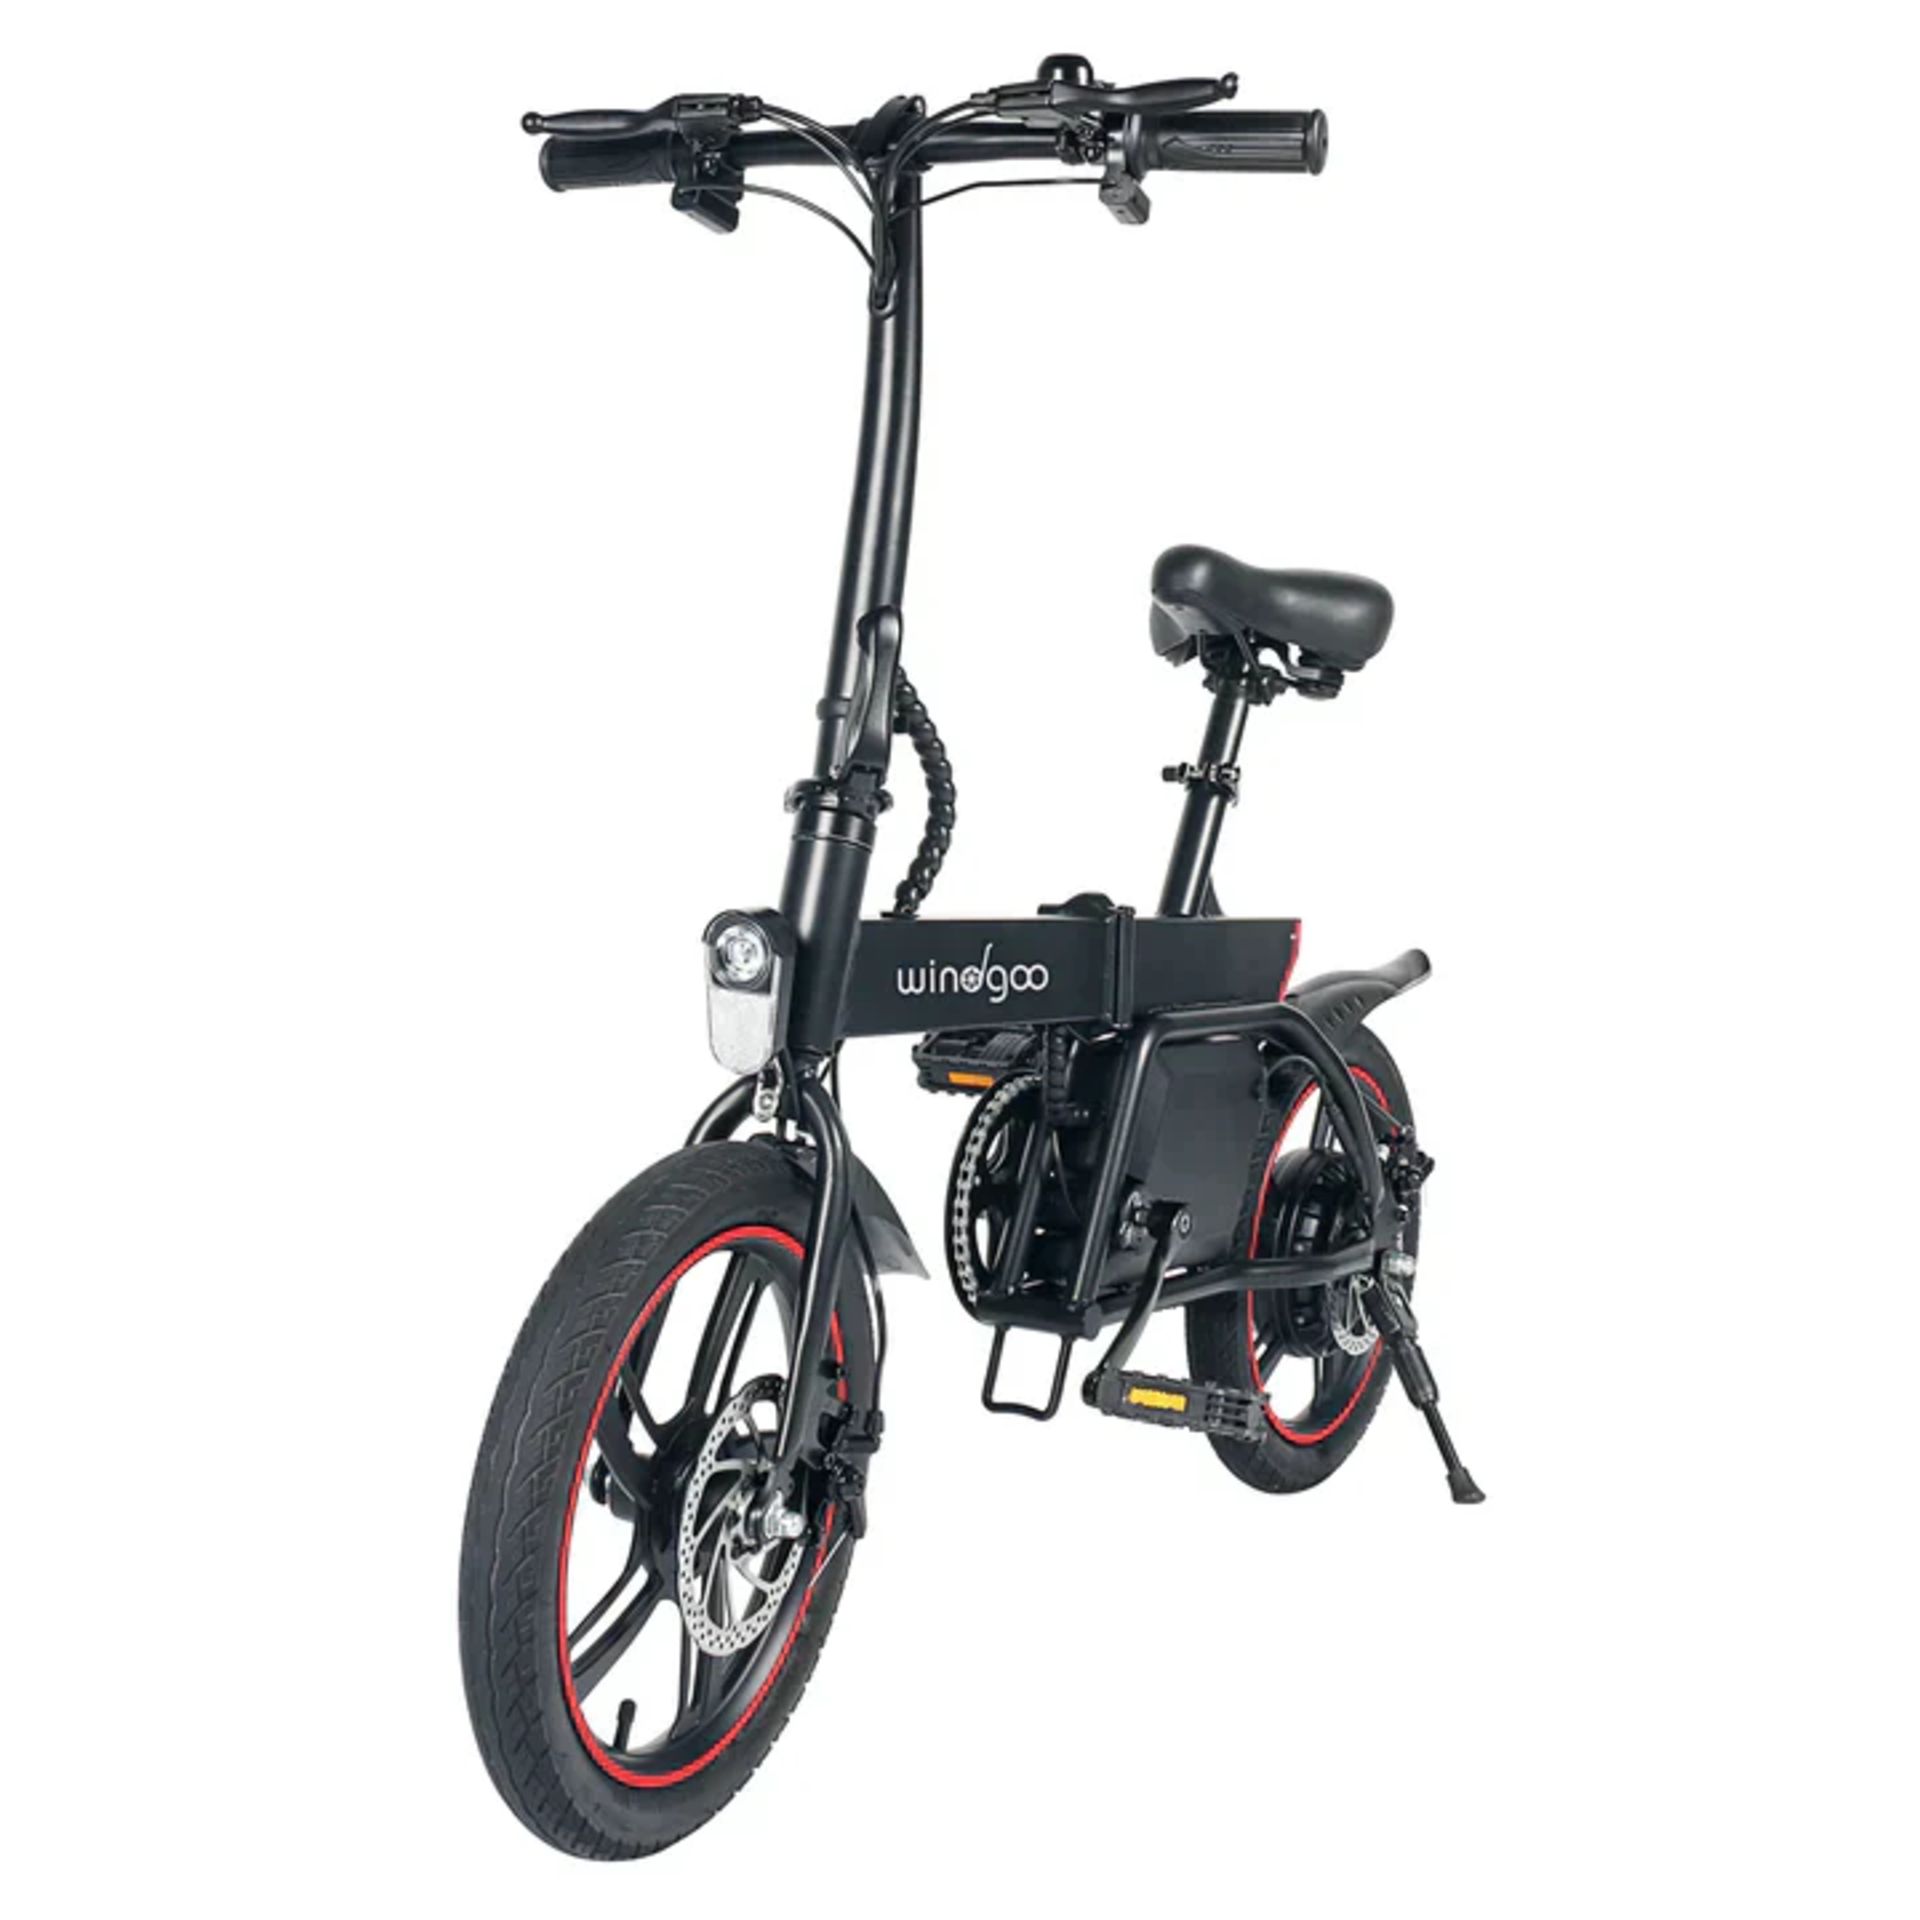 Windgoo B20 Pro Electric Bike. RRP £1,100.99. With 16-inch-wide tires and a frame of upgraded - Bild 6 aus 7